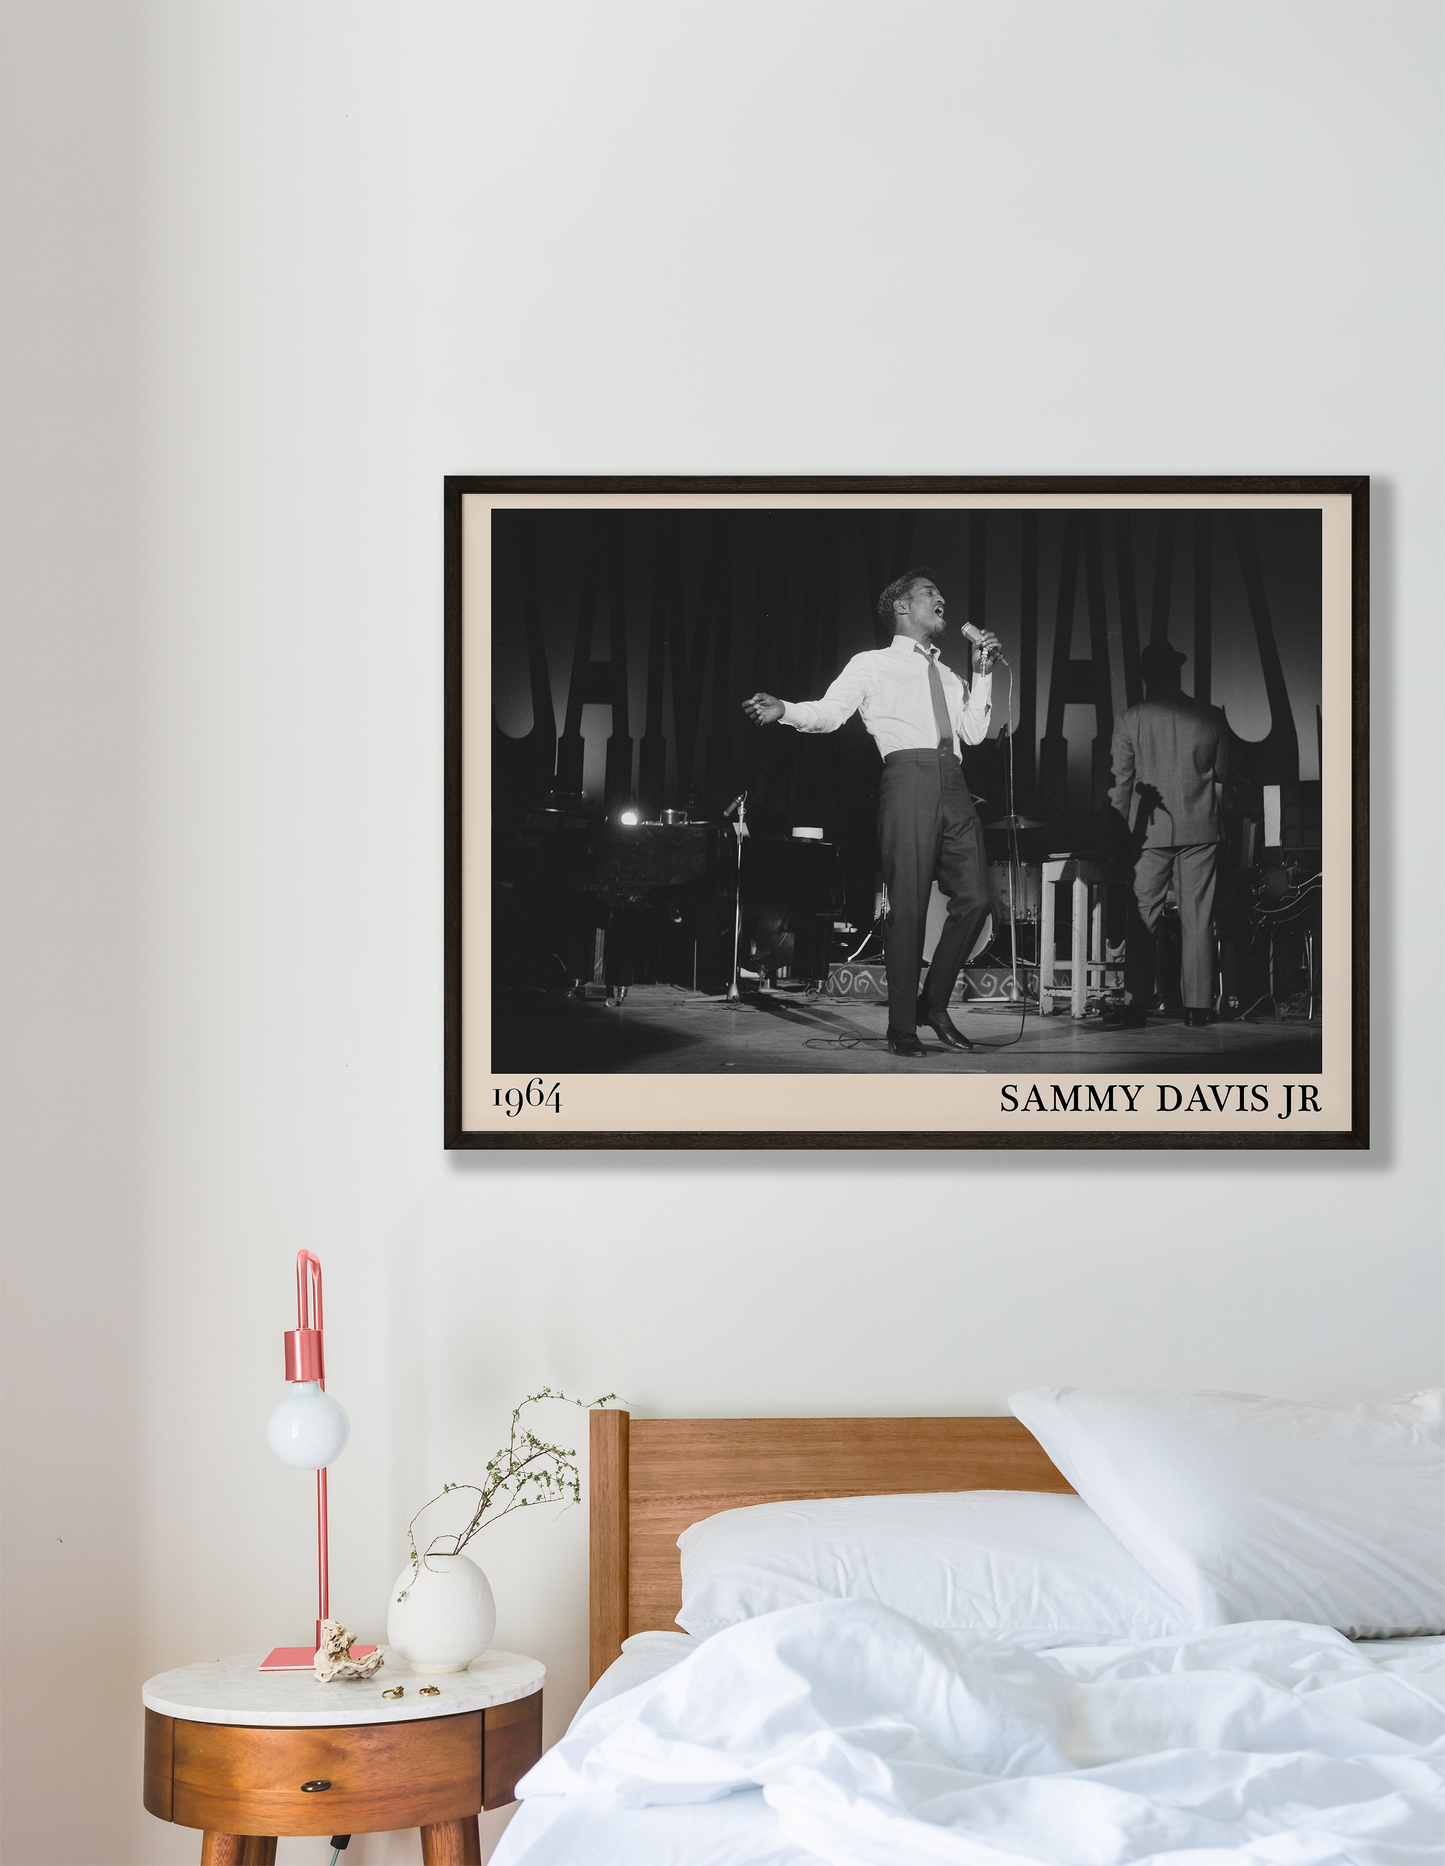 1964 picture of Sammy Davis Jr singing.Picture crafted into a cool black framed jazz print, with an off-white border. Poster is hanging on a grey bedroom wall